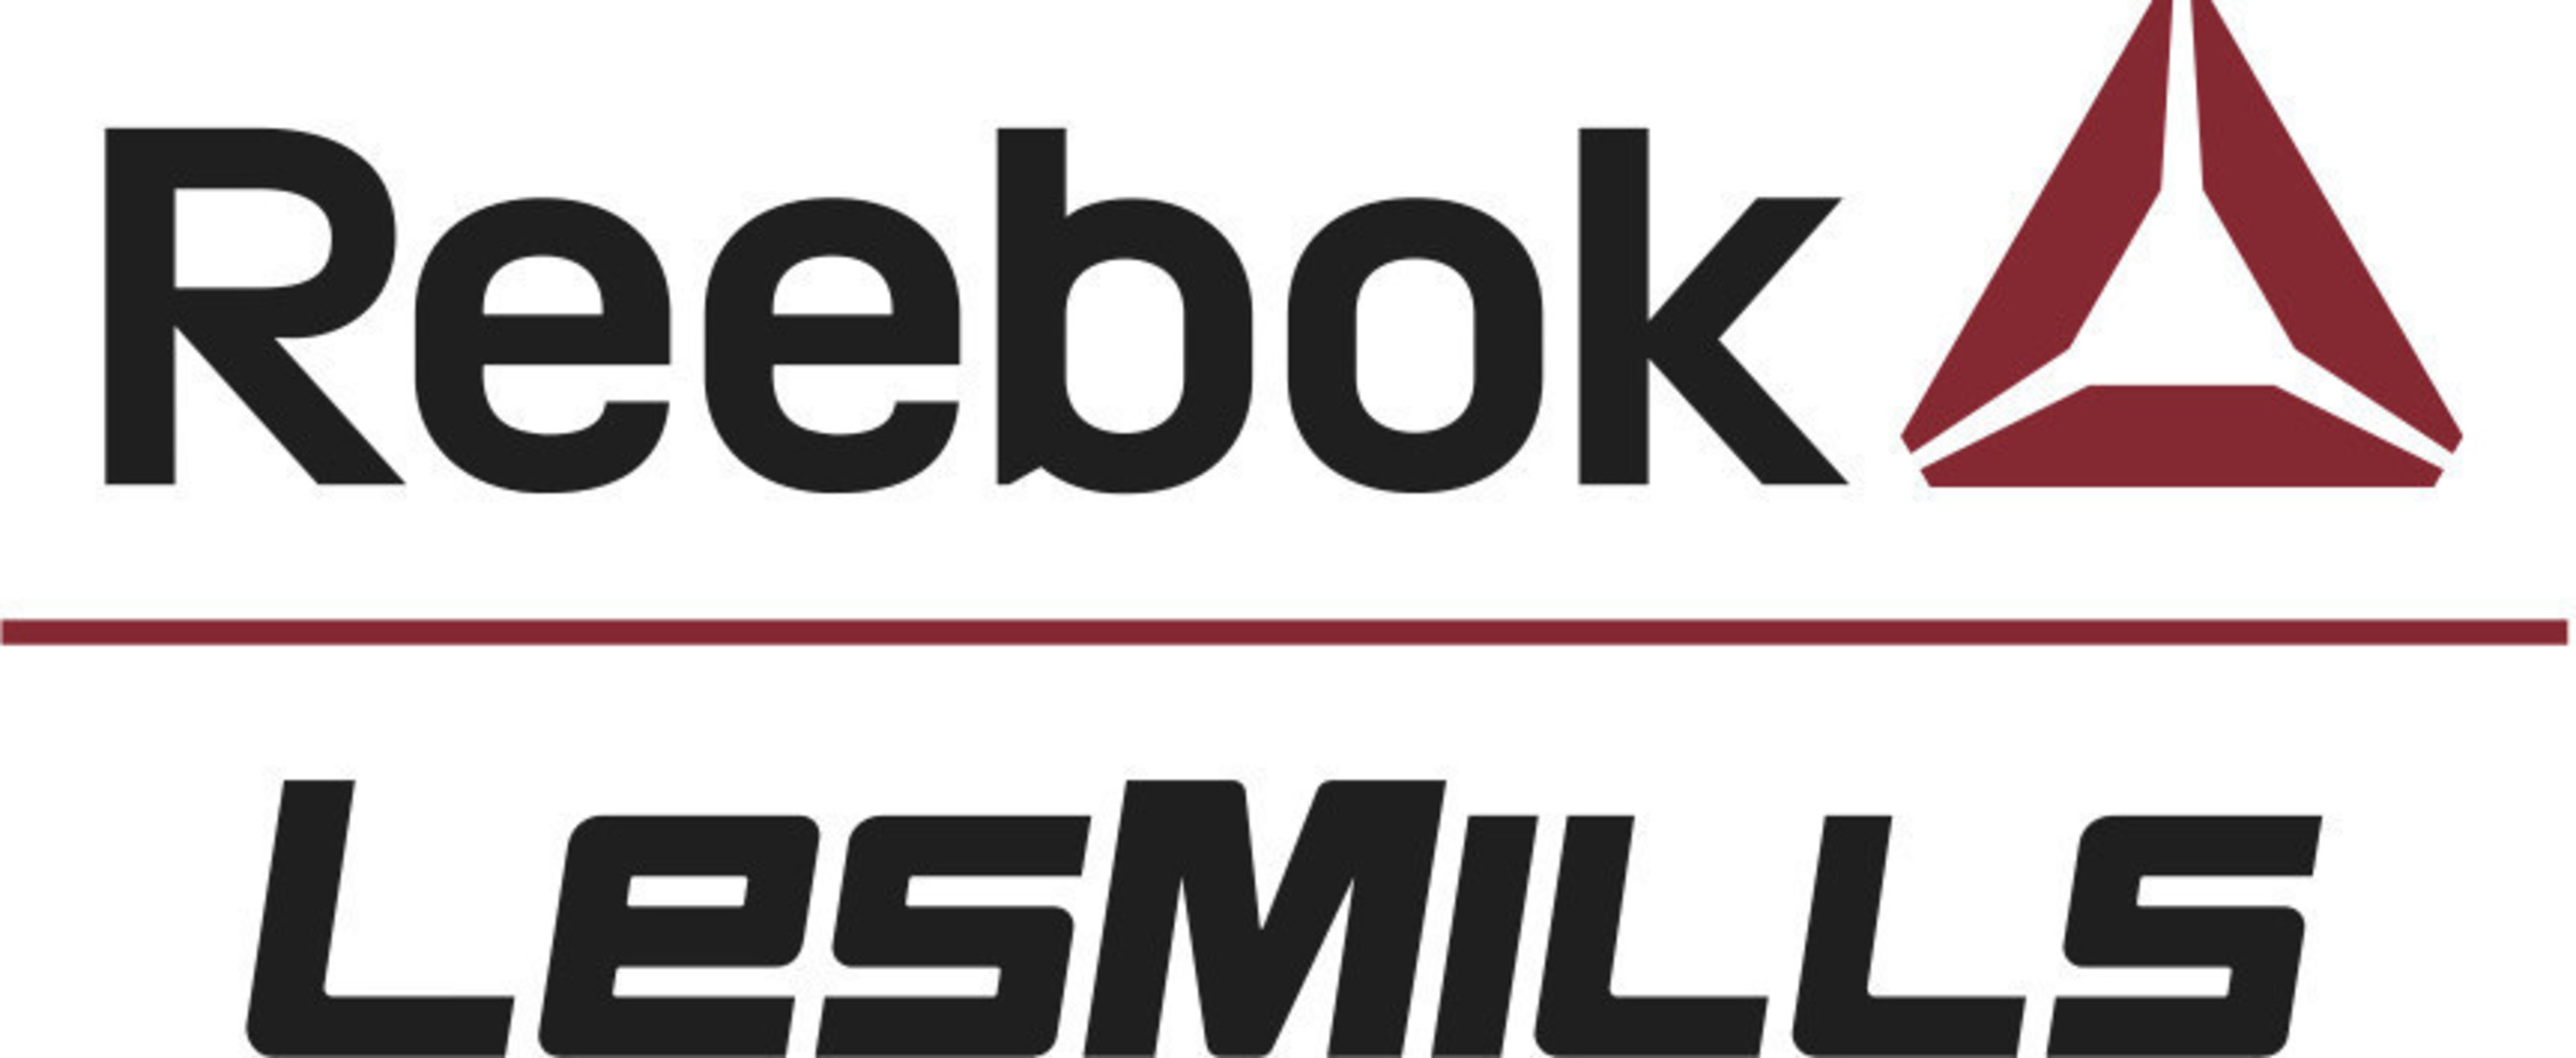 les mills and reebok